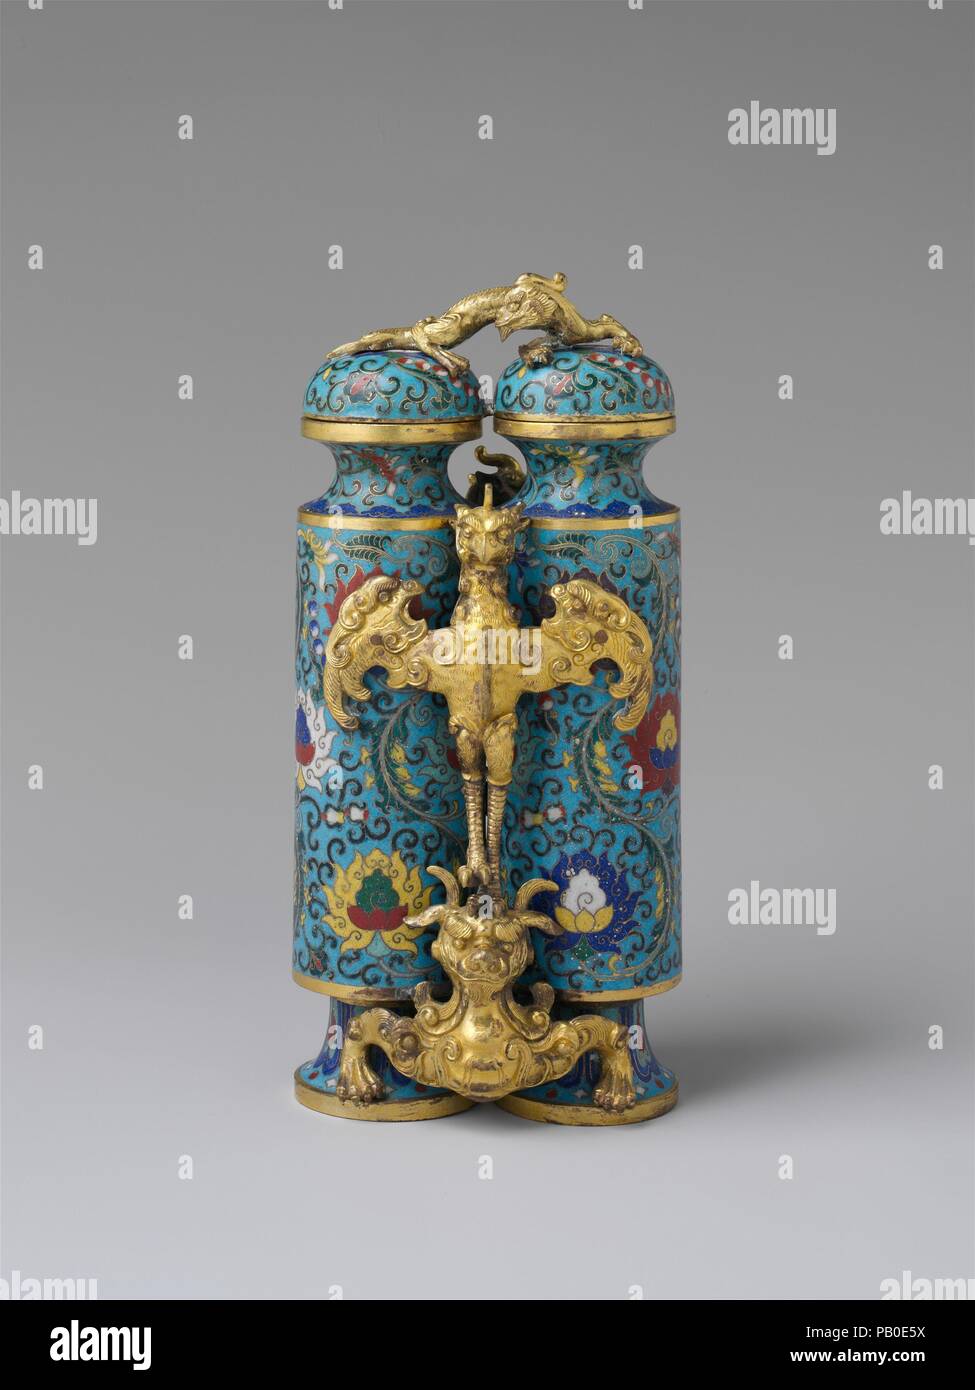 Champion Vase. Culture: China. Dimensions: H. 8 1/2 in. (21.6 cm); W. 3 7/8 in. (9.8 cm); D. 3 1/4 in. (8.3 cm). Date: 18th century.  The term 'champion vase,' which appears only in Western writings, refers to vessels that have two narrow vertical compartments connected by a carving of a mythical bird. It may be a loose translation of yingxiong bei, or hero's cup, referring to the bird (ying) and the bear (xiong) upon which it stands. Champion vases were popular during the middle and late eighteenth century, and were manufactured in different media, including jade, cloisonné enamel, and rhinoc Stock Photo